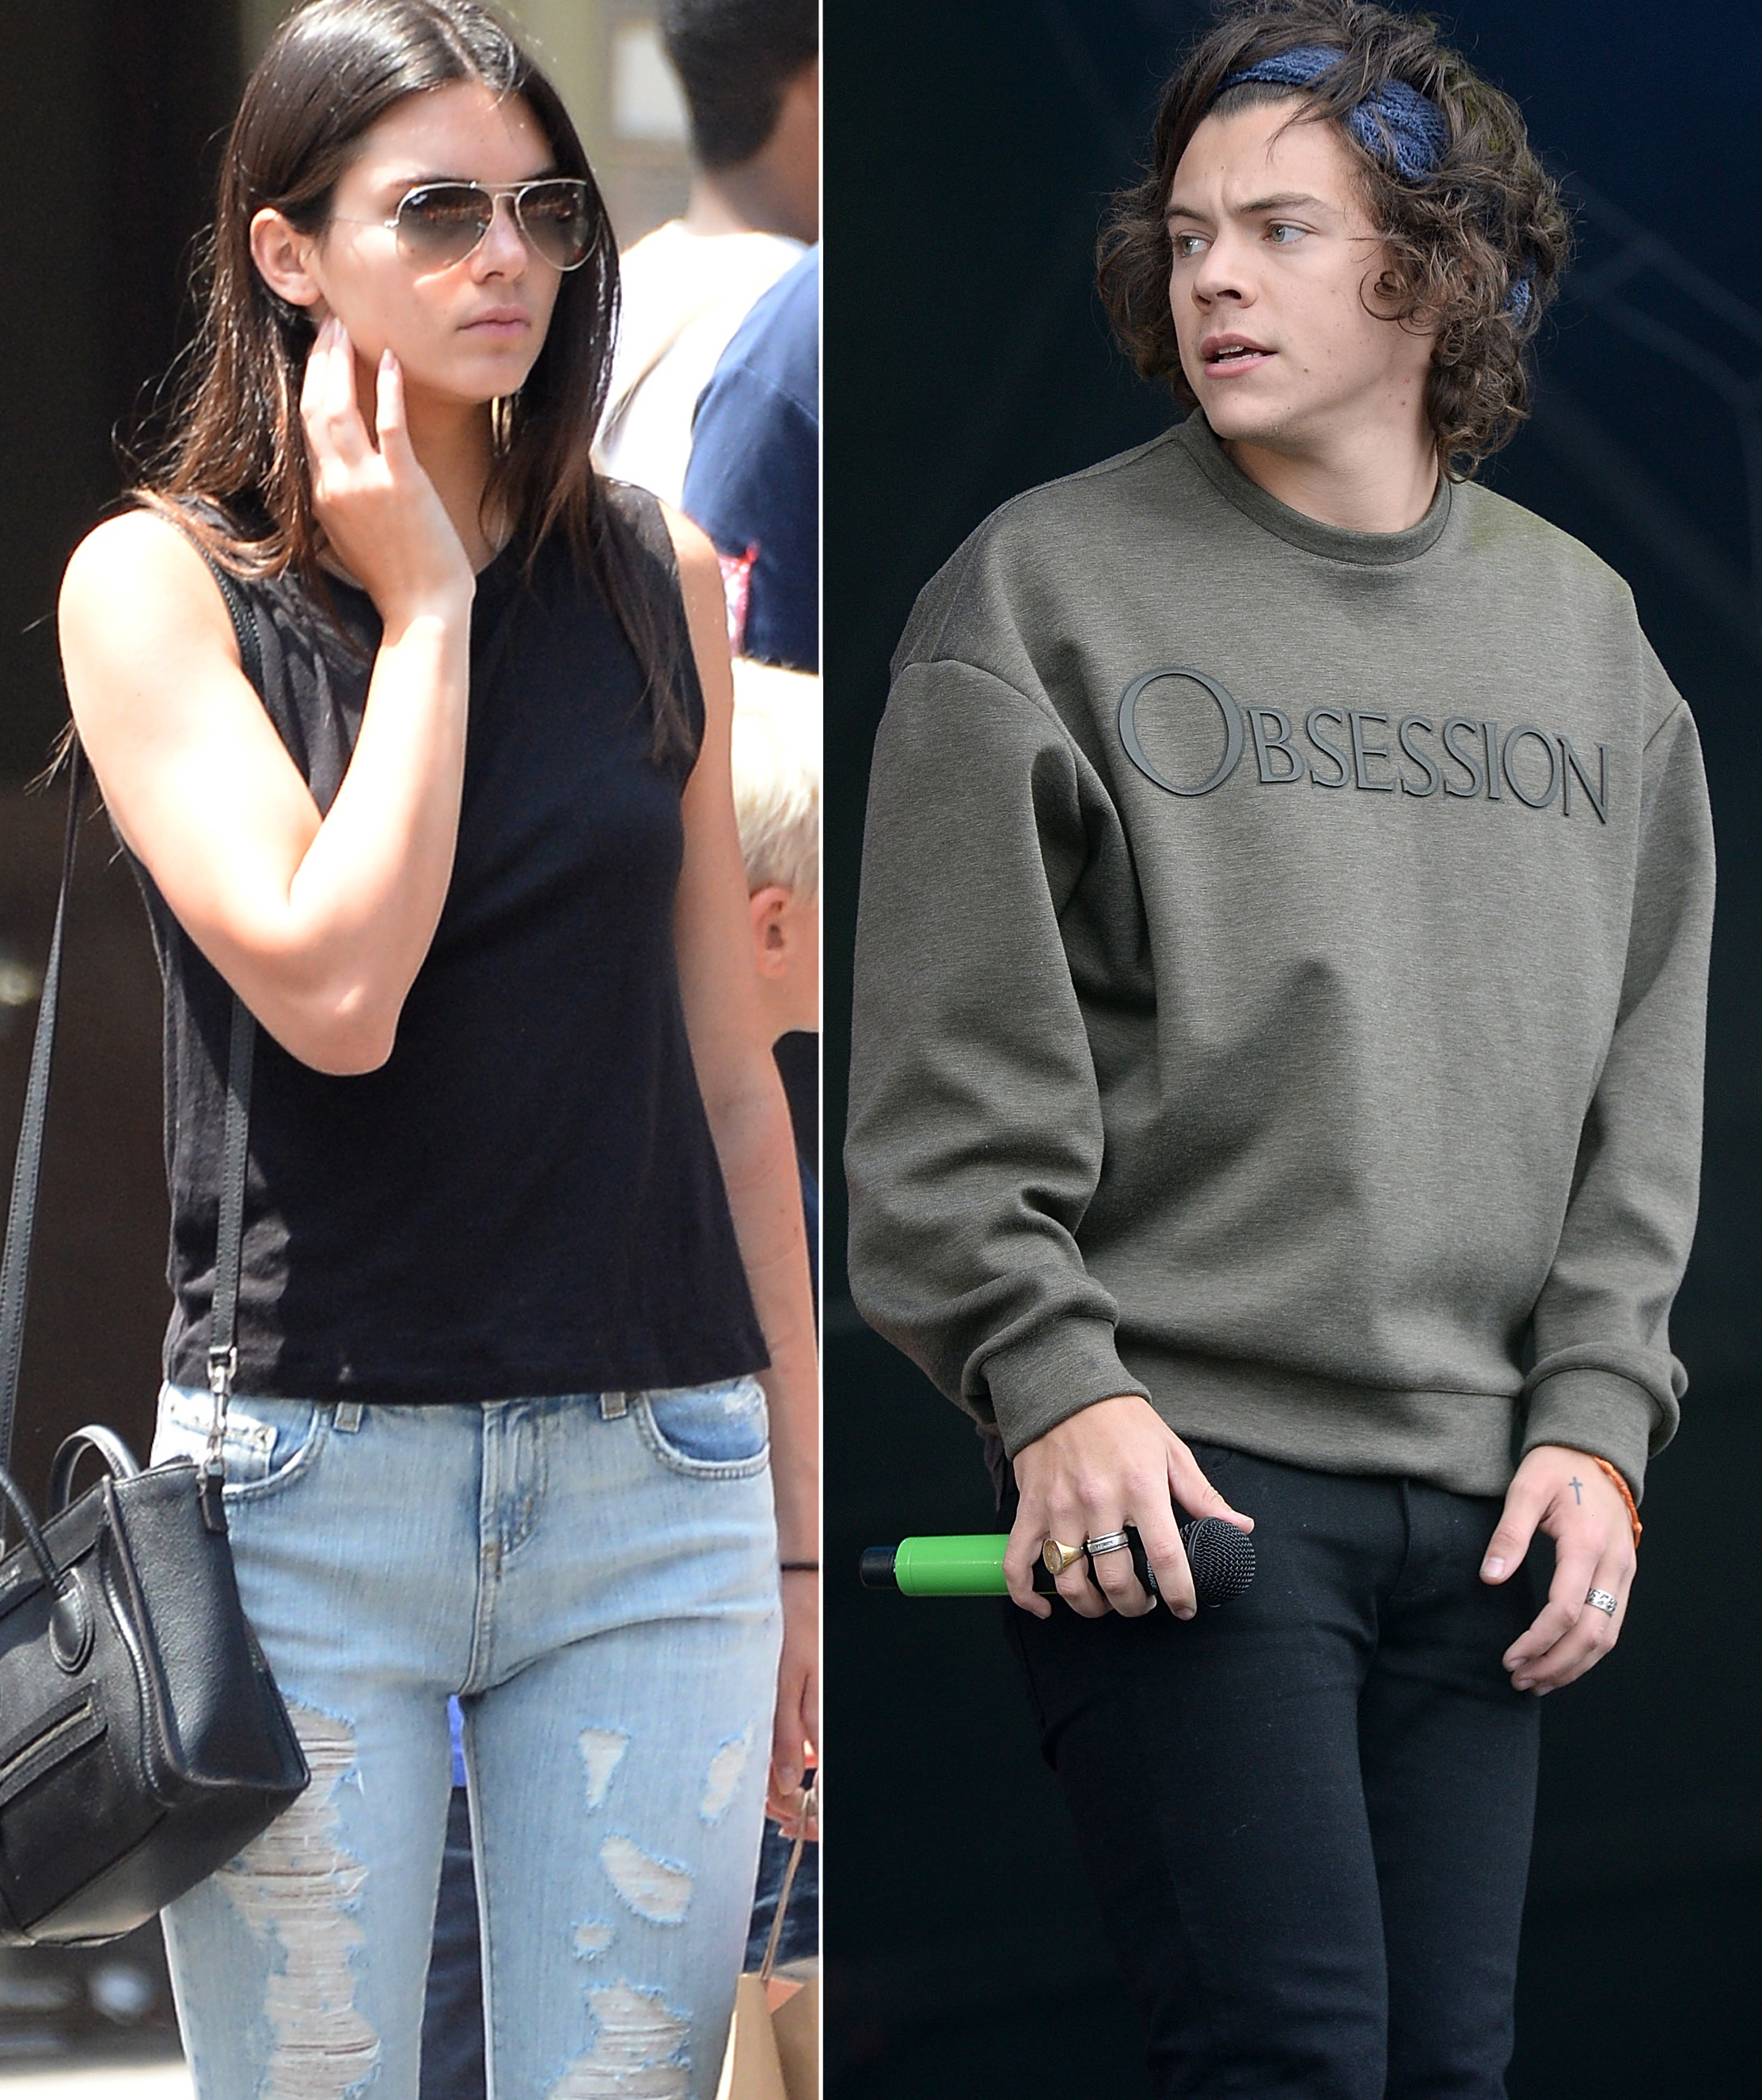 Does Kendall Jenner Want Harry Styles Back? - J-14